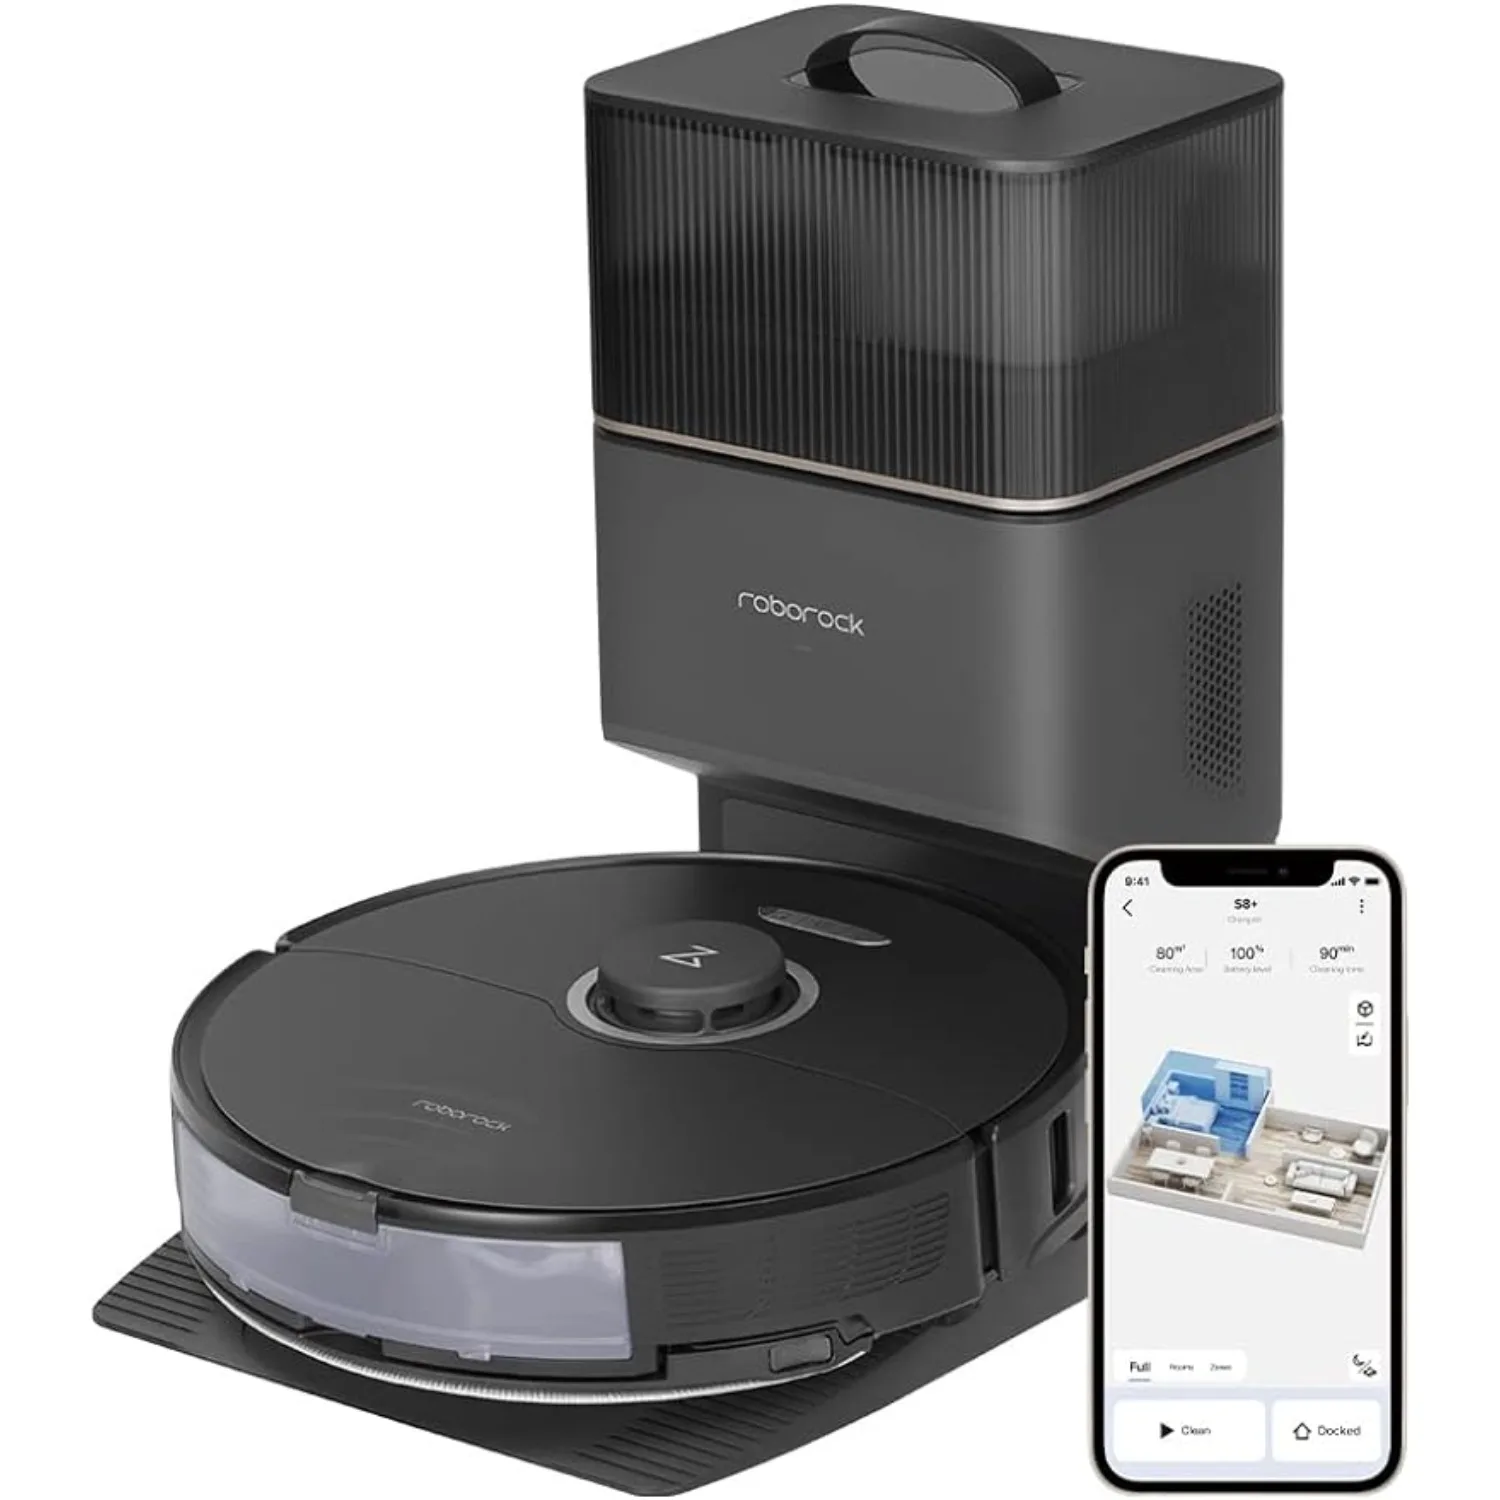 

Robot Vacuum, Sonic Mop with Self-Empty Dock, Stores up to 60-Days of Dust, Auto Lifting Mop, Ultrasonic Carpet Detection